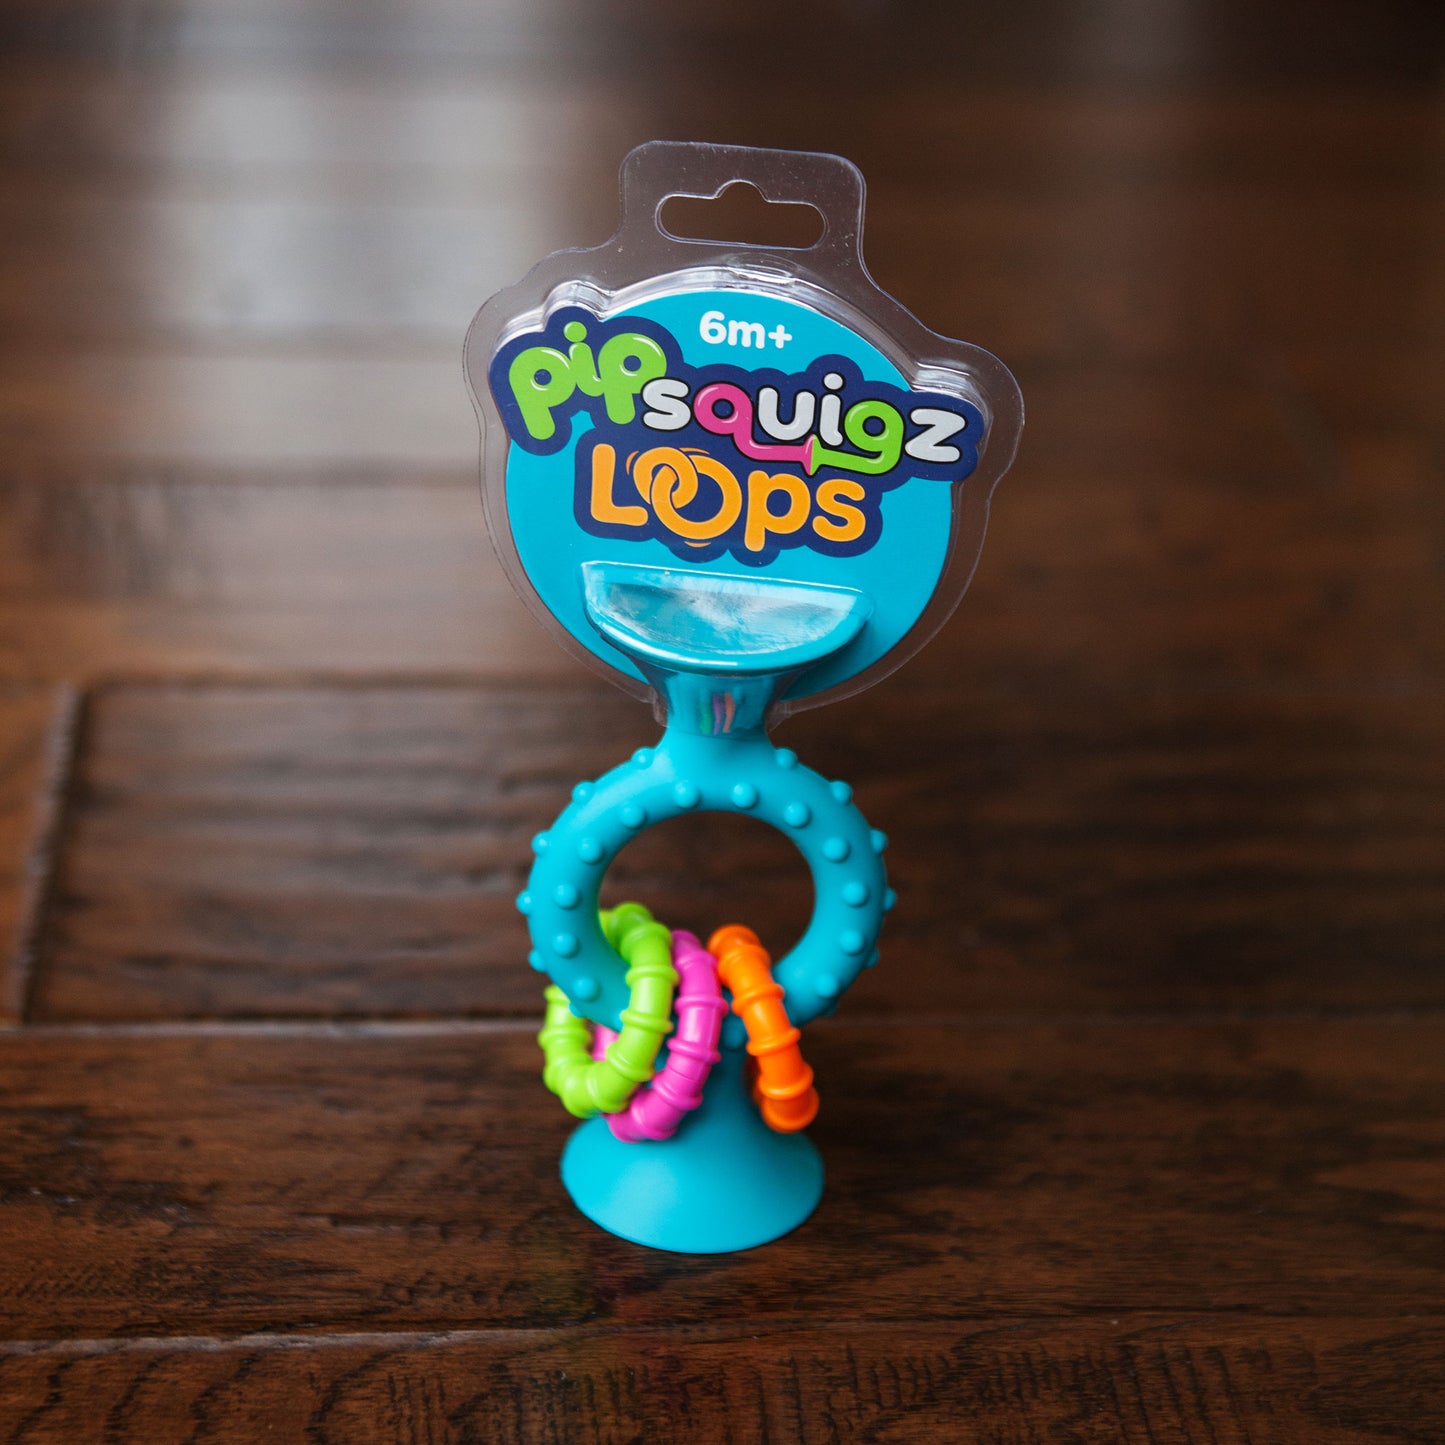 Pipsquigz loops